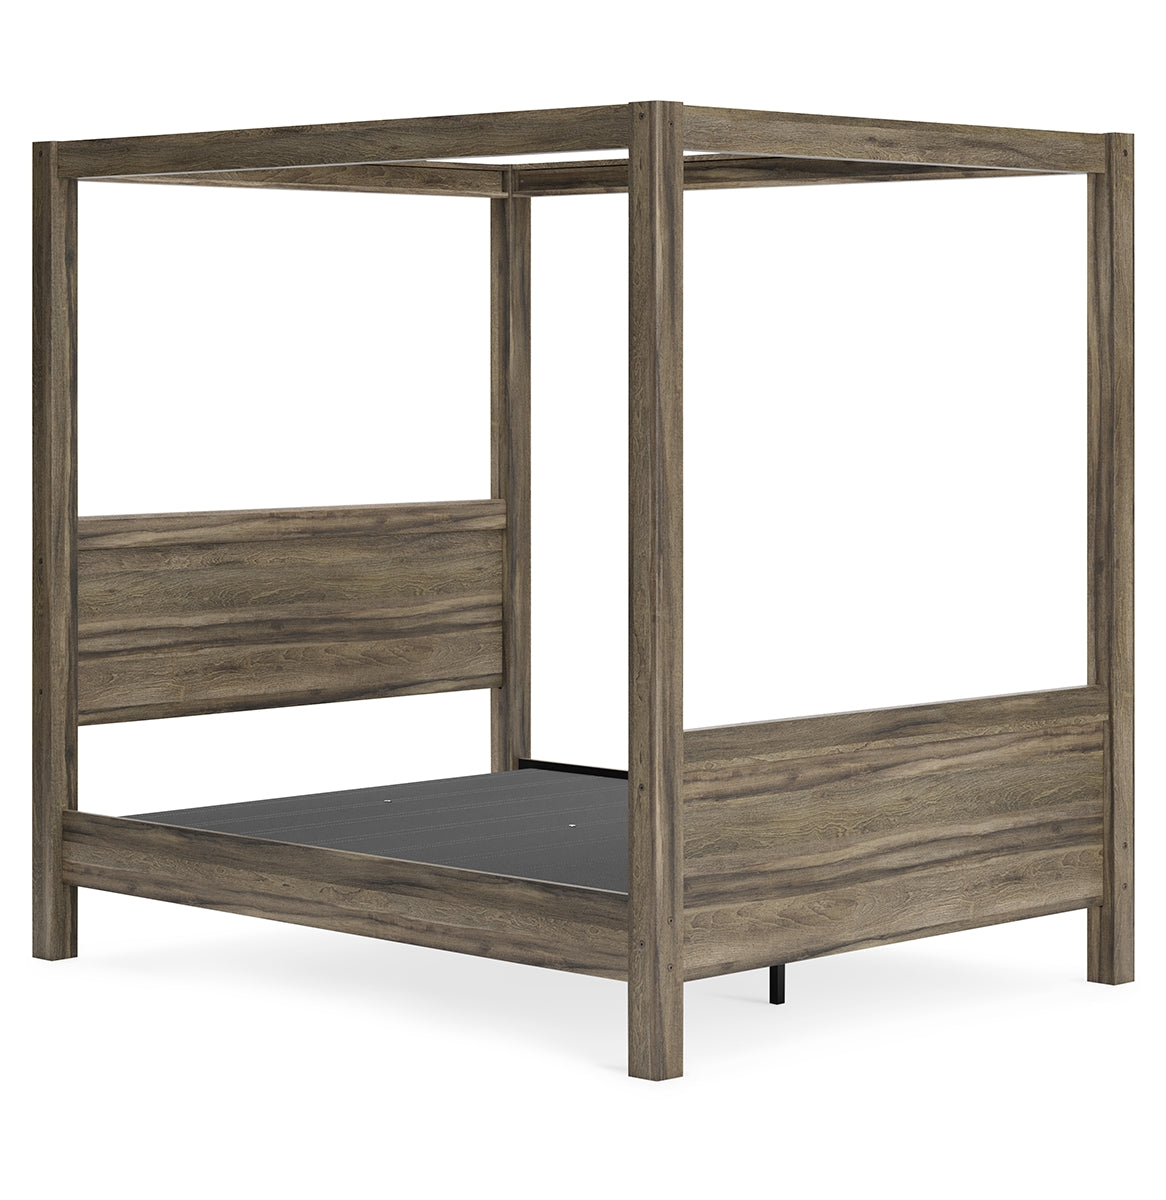 Shallifer Queen Canopy Bed